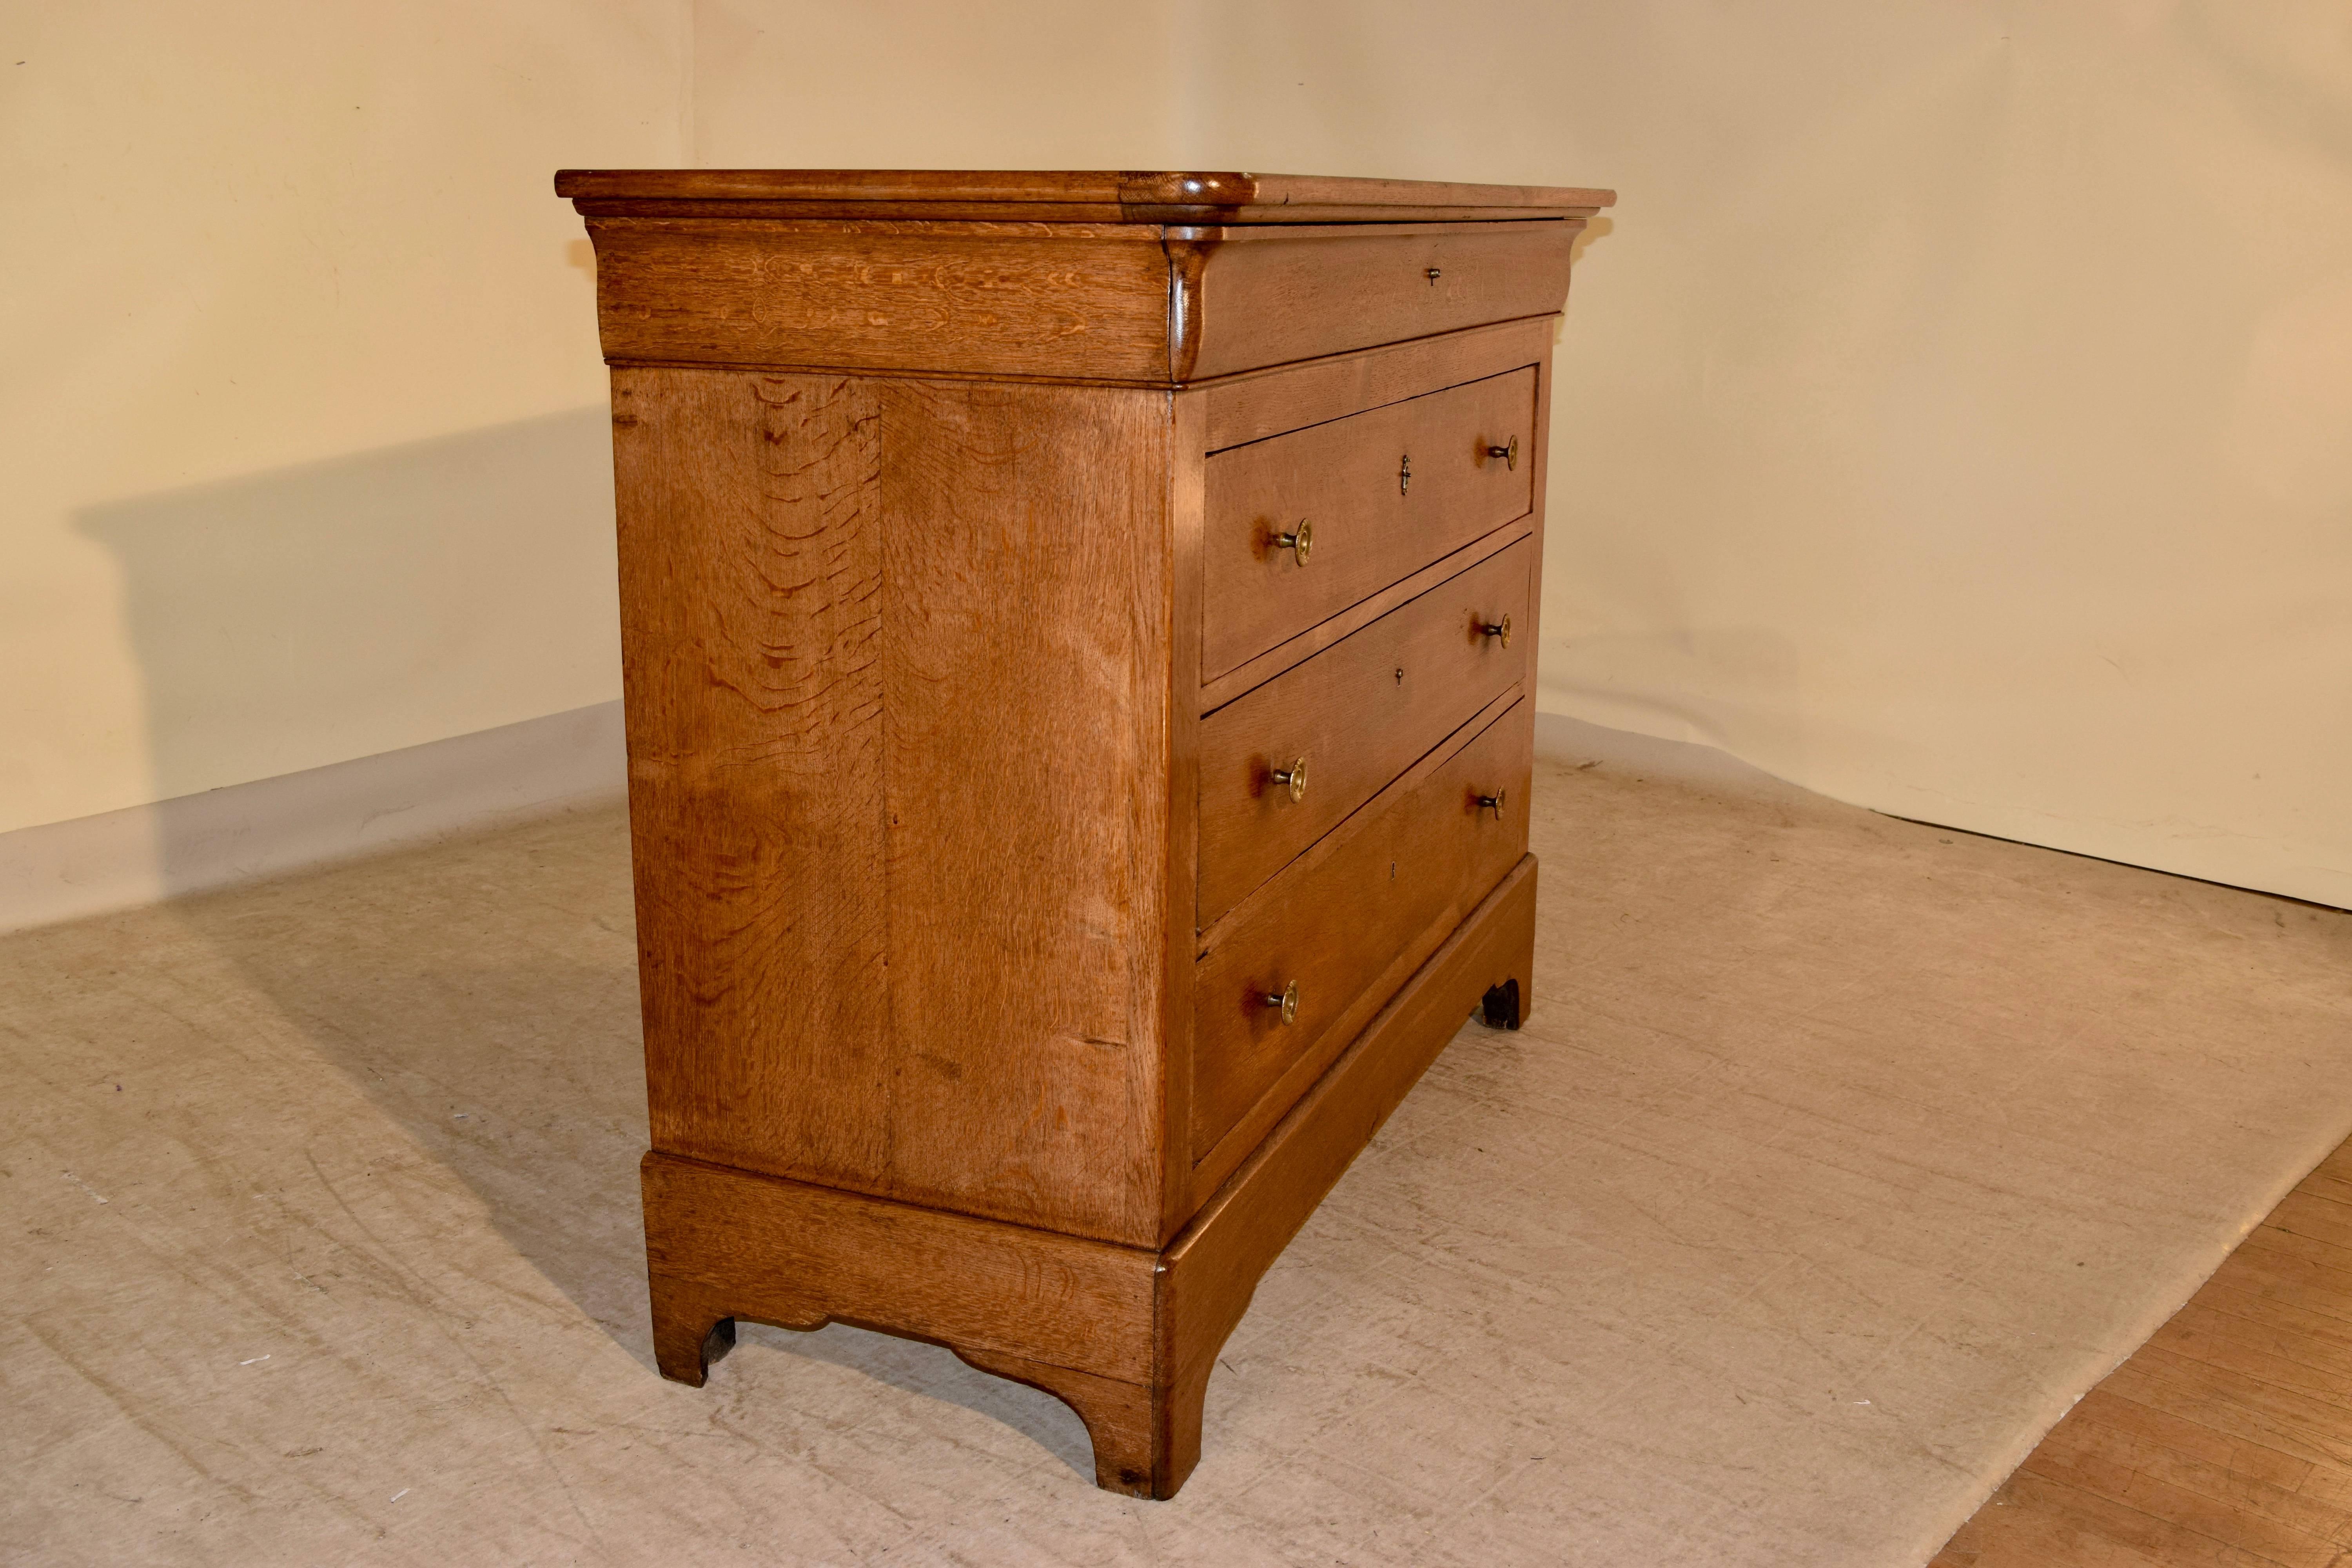 19th century Louis Phillipe commode in oak. The top is banded around the edge, following down to a single drawer hidden in the top molding and three lower drawers. Raised on bracket feet. Slight chip on lower drawer.